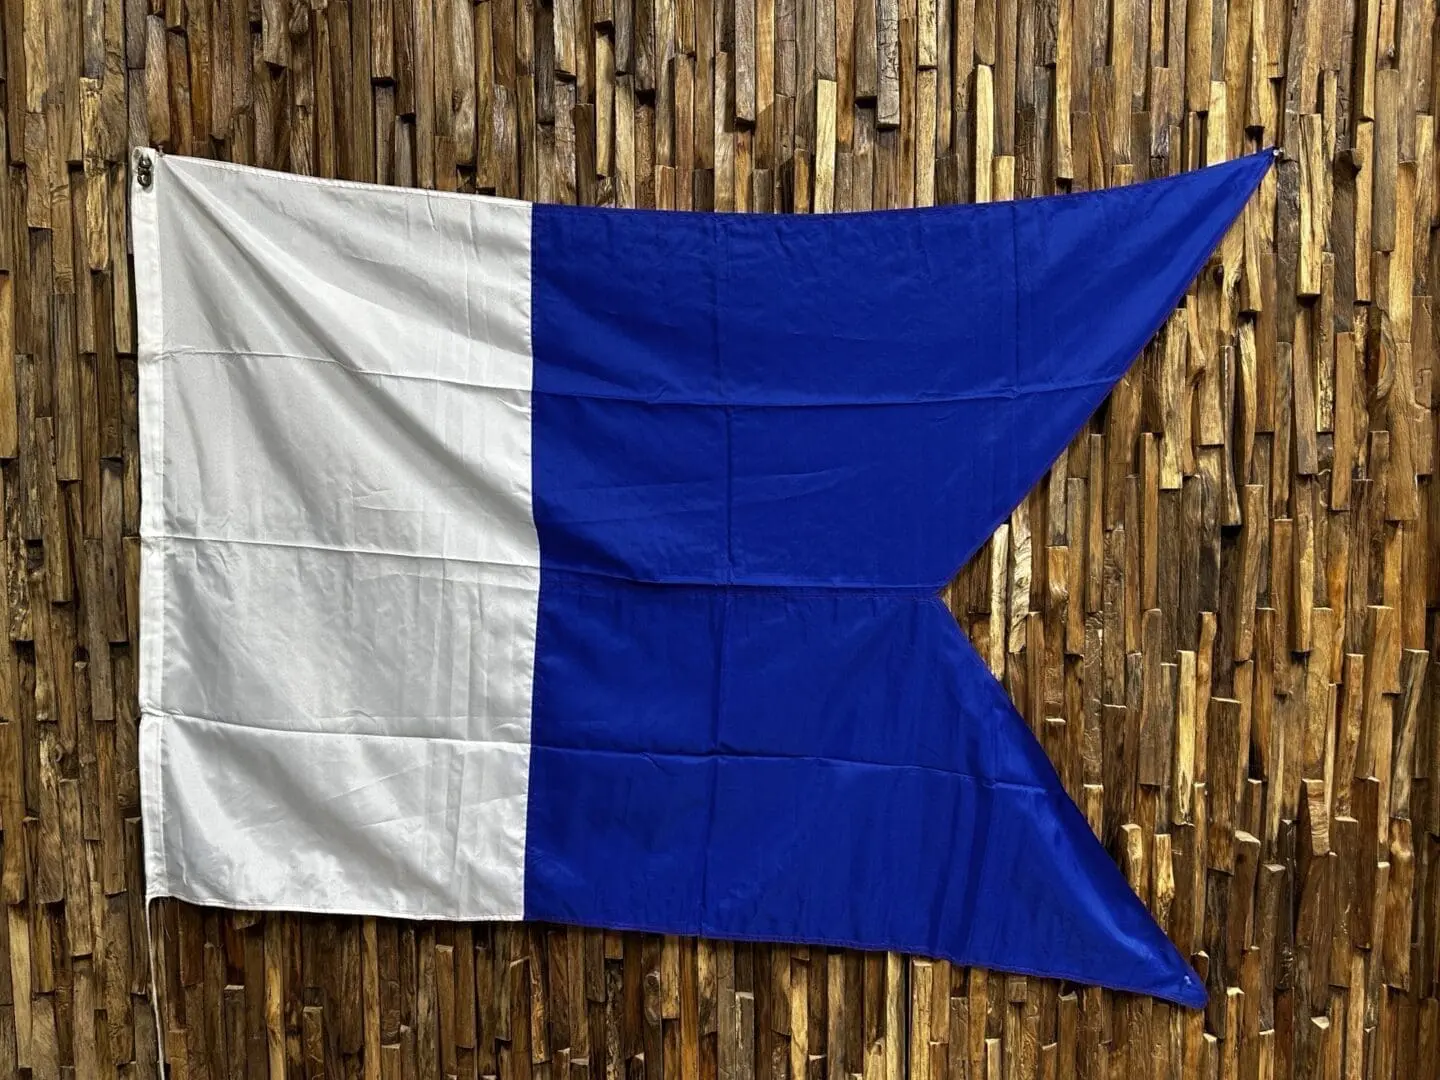 A blue and white flag hanging on the wall.